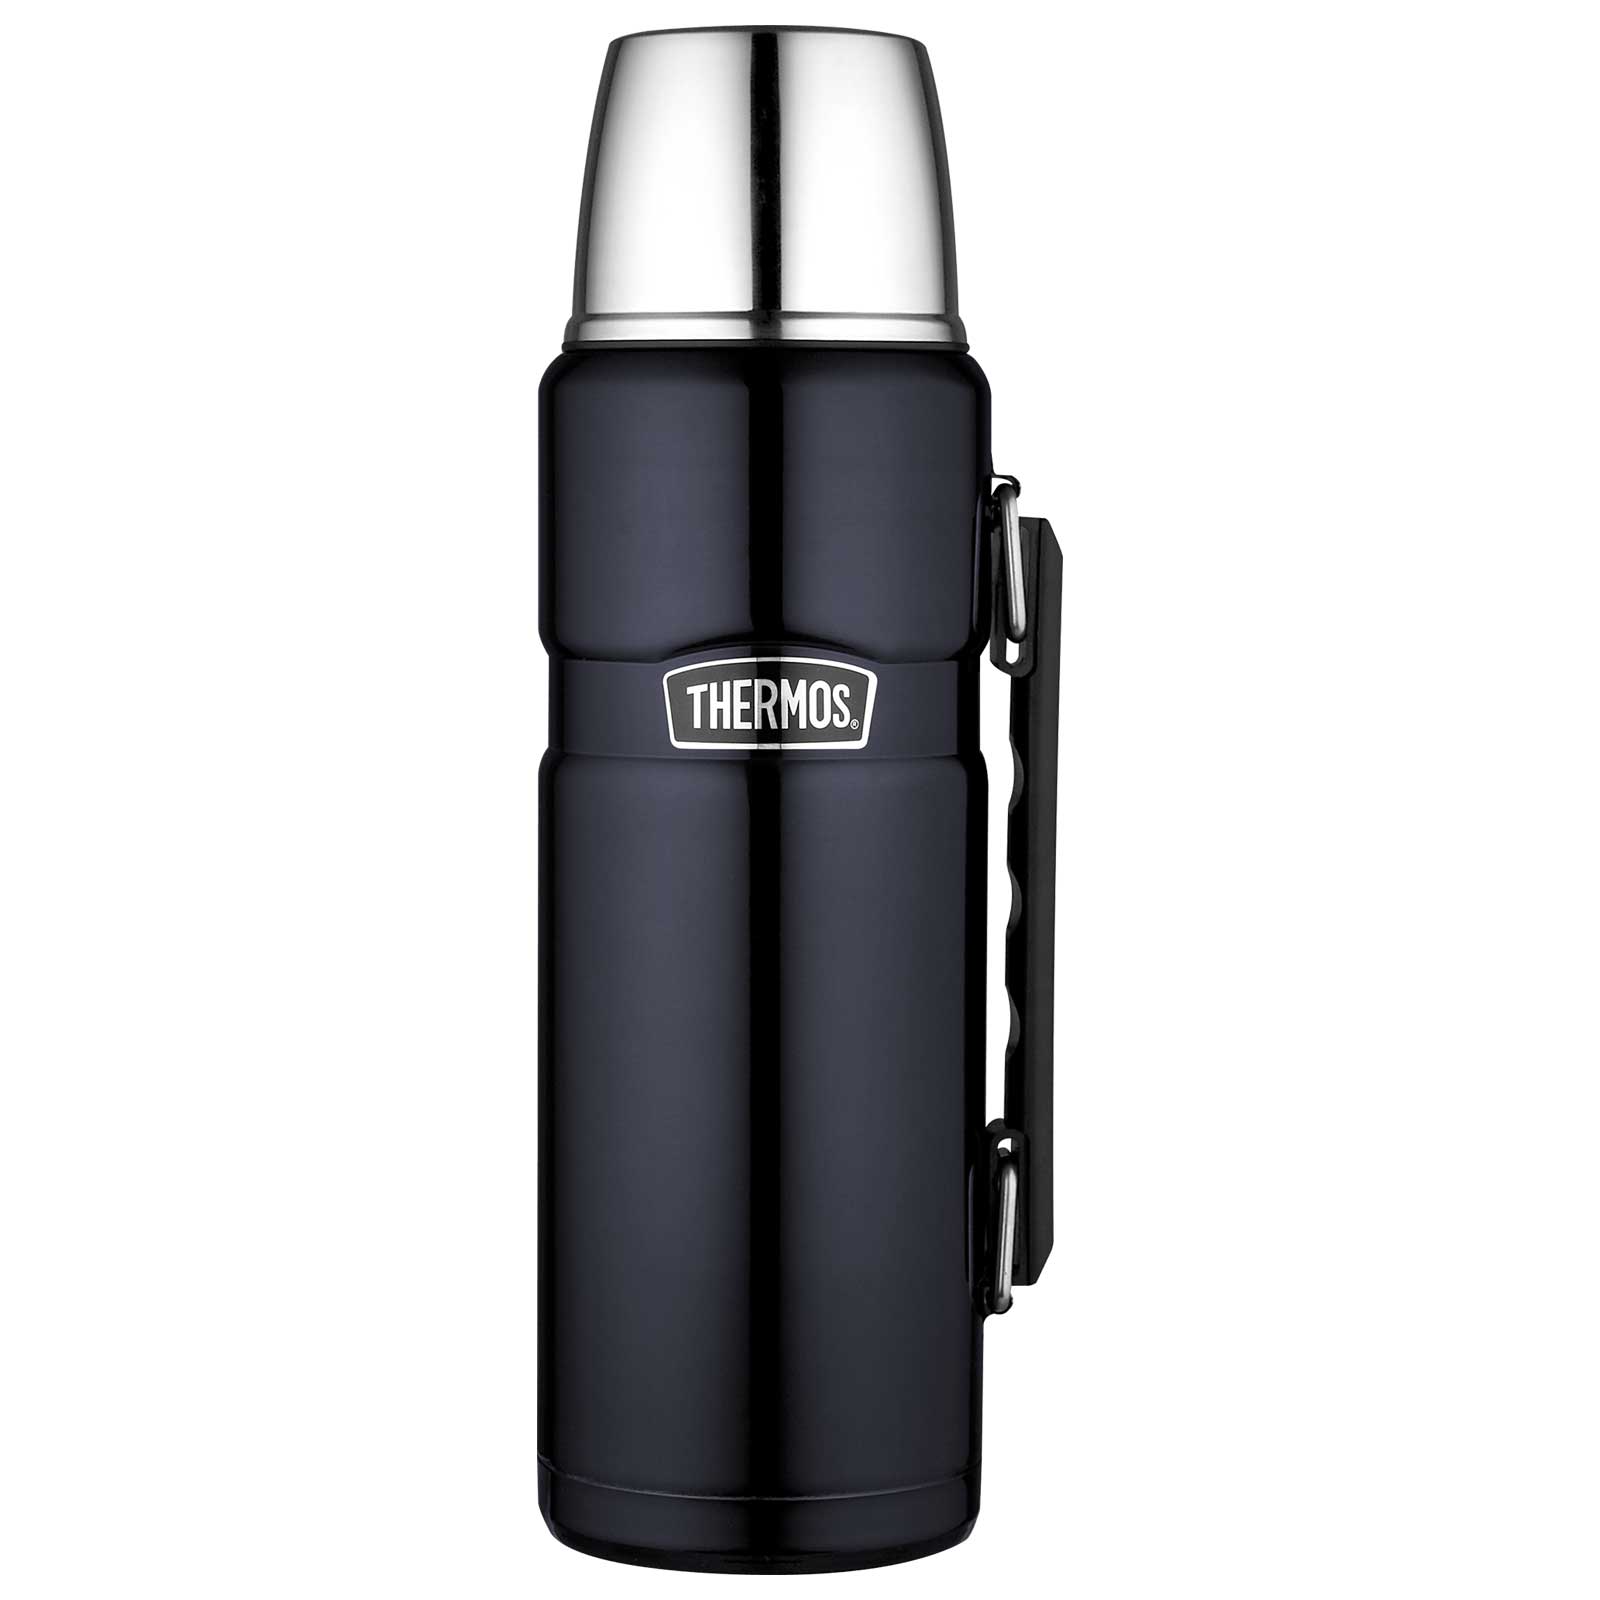 Productfoto van THERMOS® Stainless King Insulated Beverage Bottle 1.2L - midnight blue polished